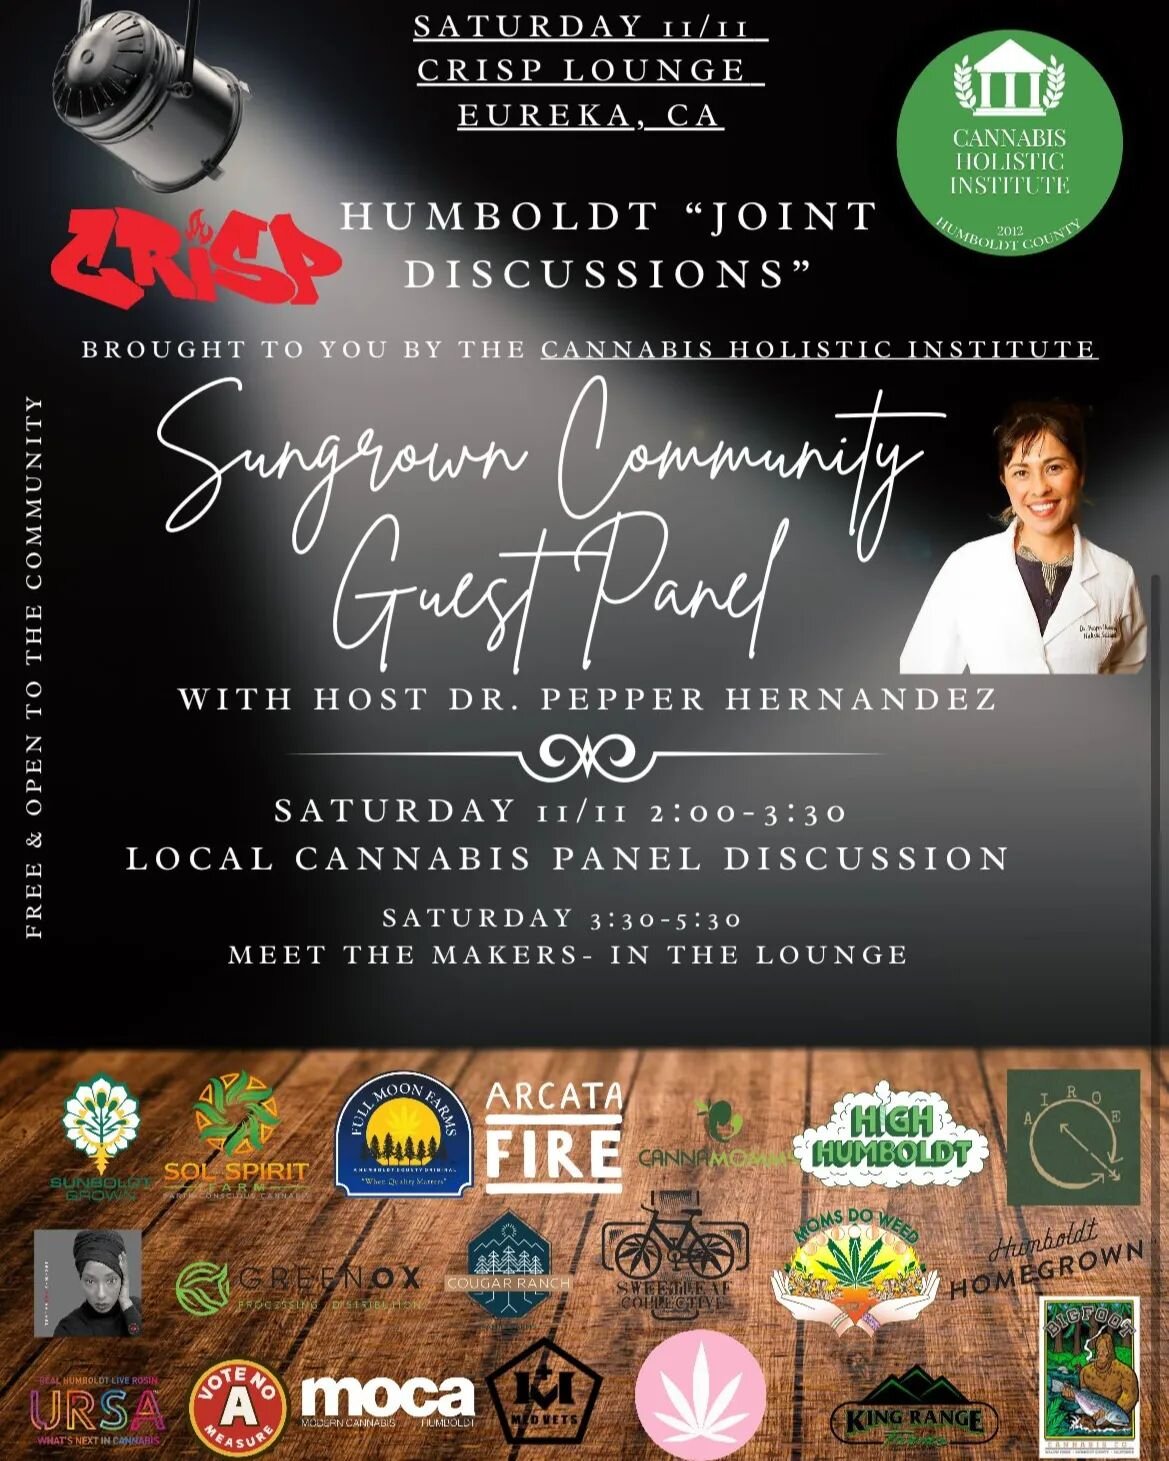 Come join us on Veterans Day 11/11 @crispeureka  2pm-5:30pm for a free community event! Humboldt Joint Discussions is a podcast and panel
discussion created and hosted by Dr. Pepper Hernandez of the @cannabisholisticinstitute This event is about brin